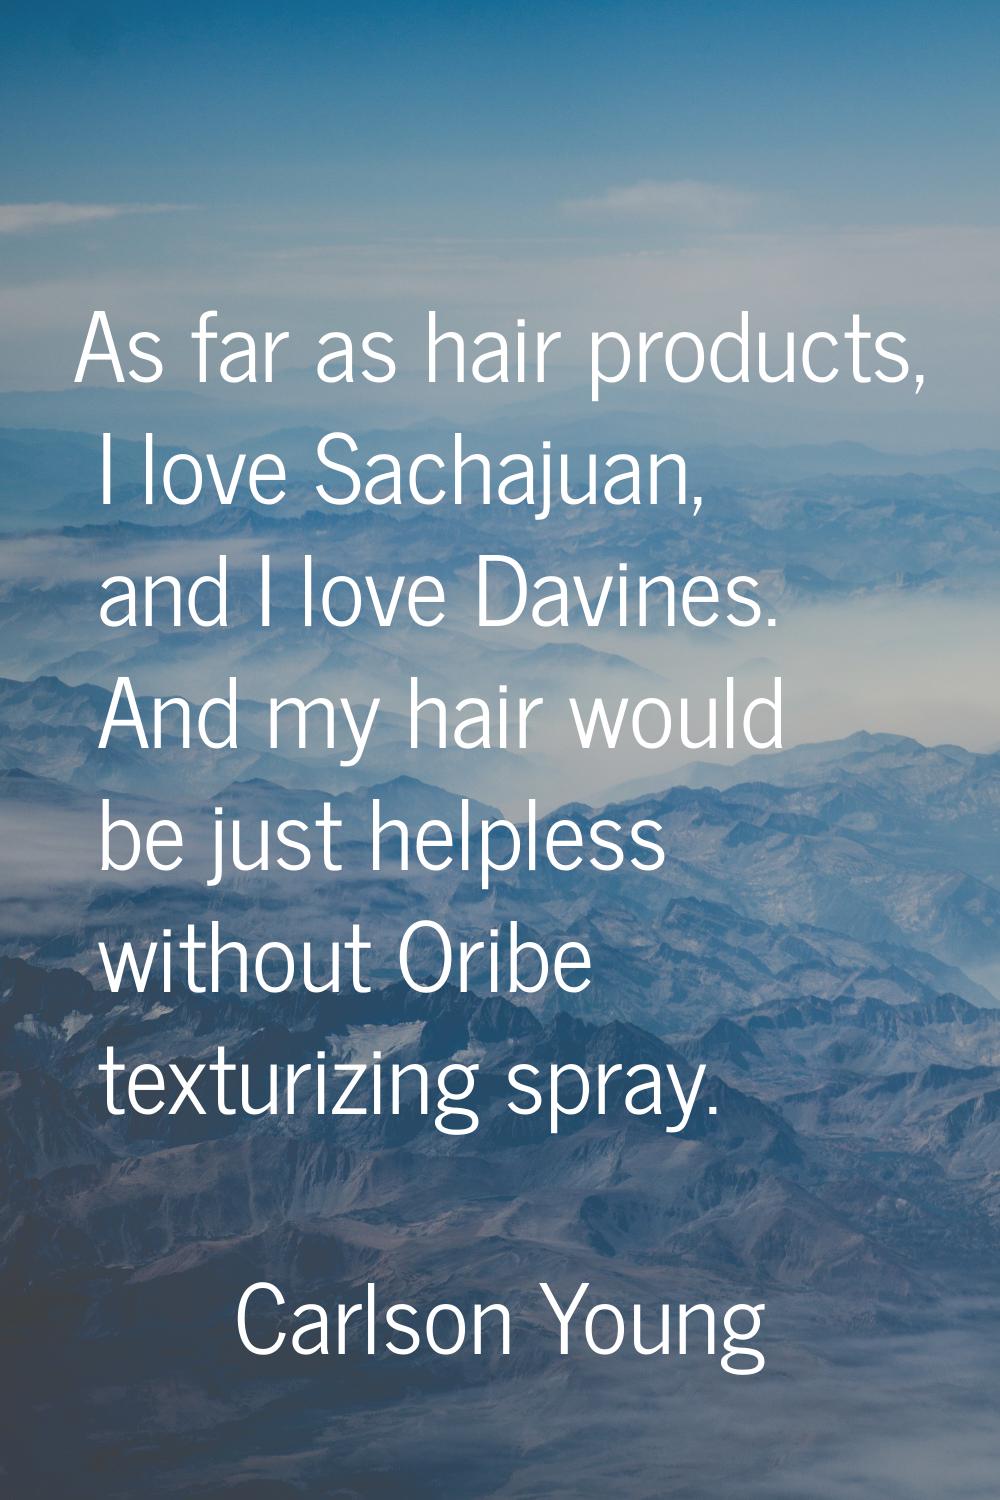 As far as hair products, I love Sachajuan, and I love Davines. And my hair would be just helpless w